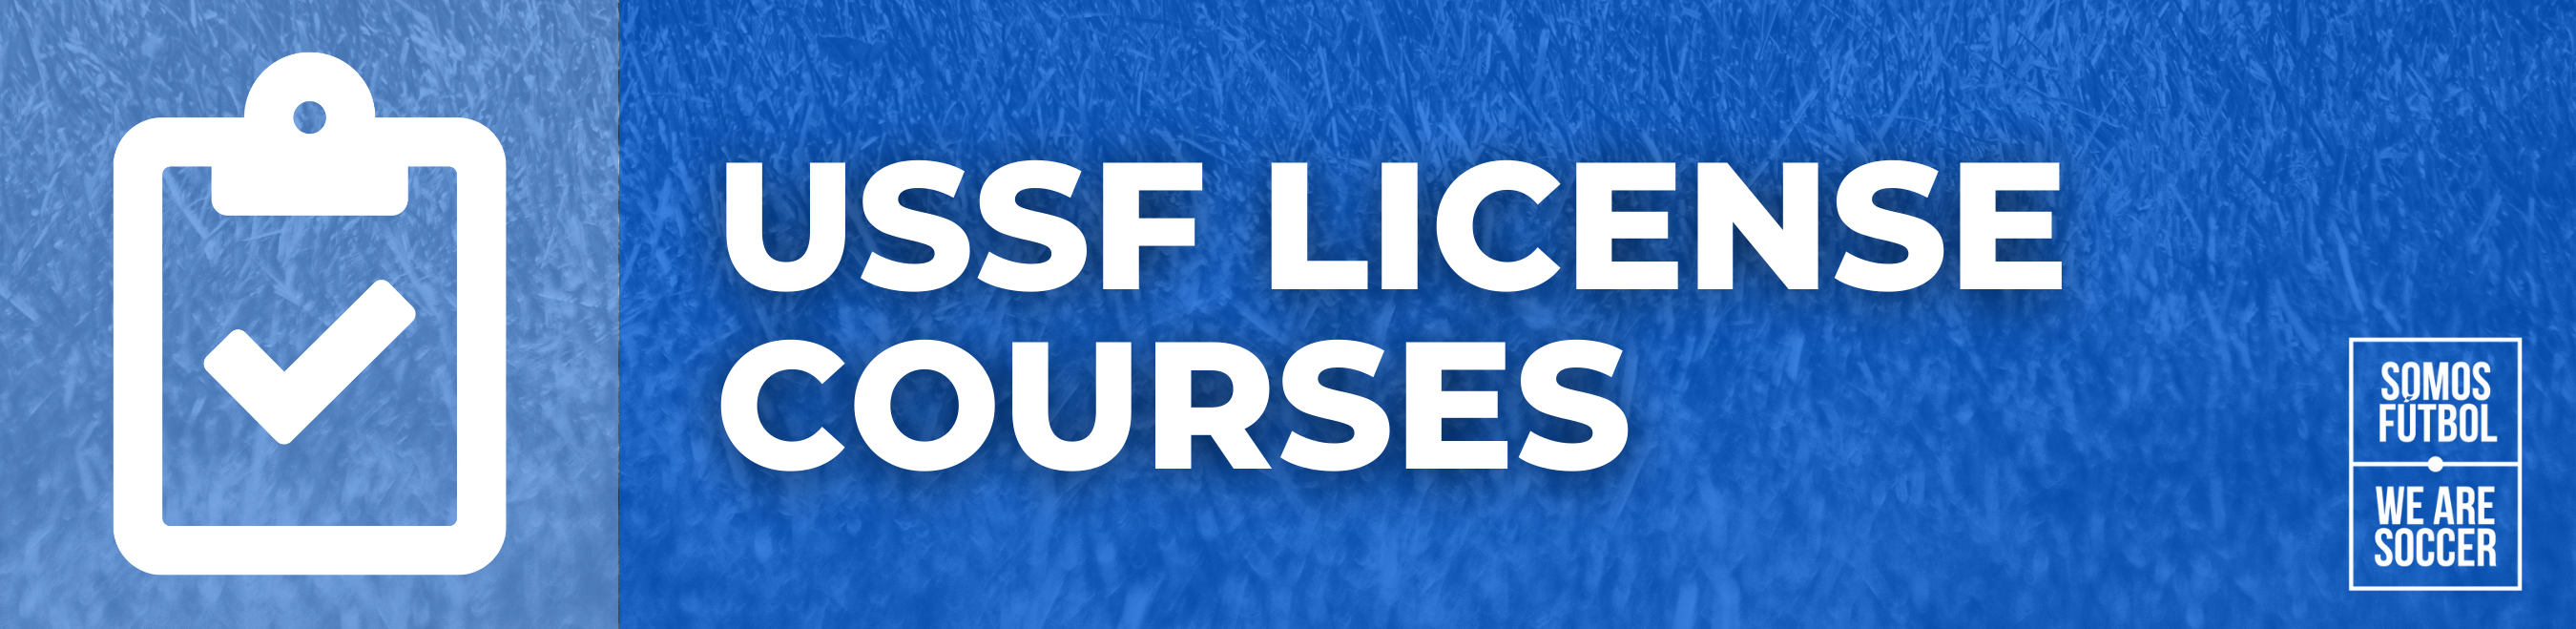 USSF LICENSE COURSES